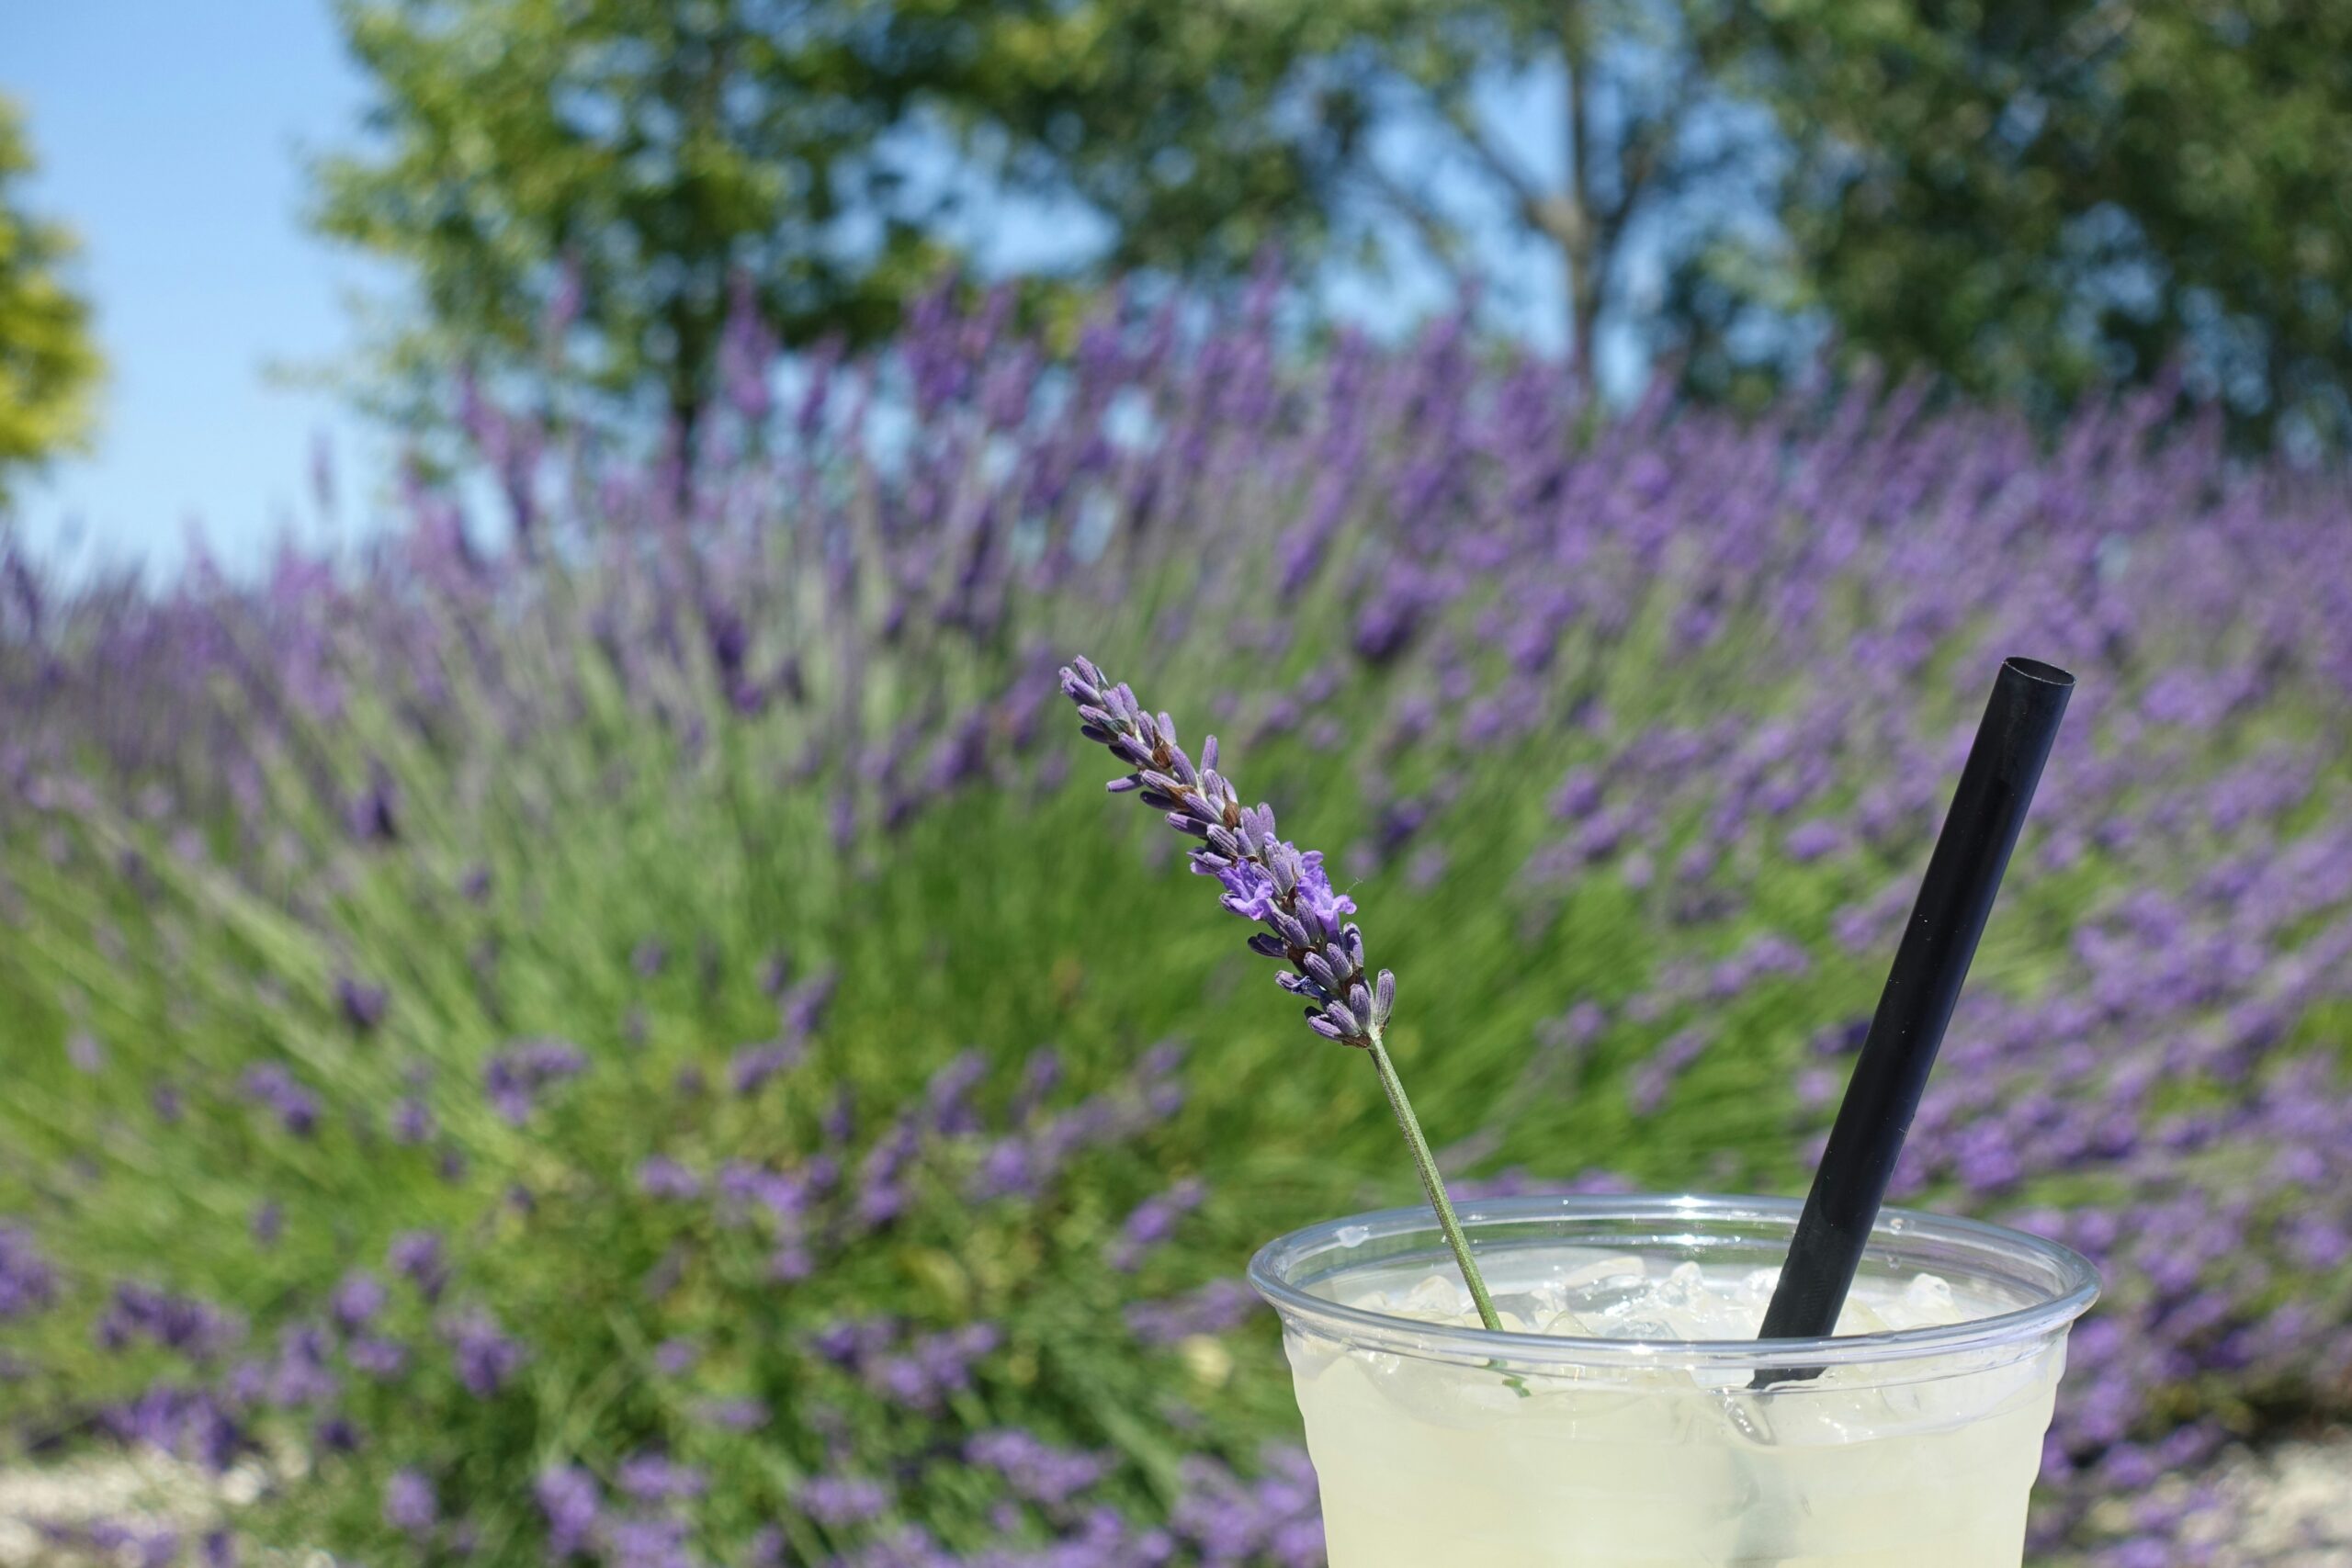 Lavender Lemonade is the best drink and tequila cocktail of the summer. Combine the rich floral flavor with the tangy lemonade and the kick tequila for the best cocktail you'll ever have. Pictured: Lavender Lemonade